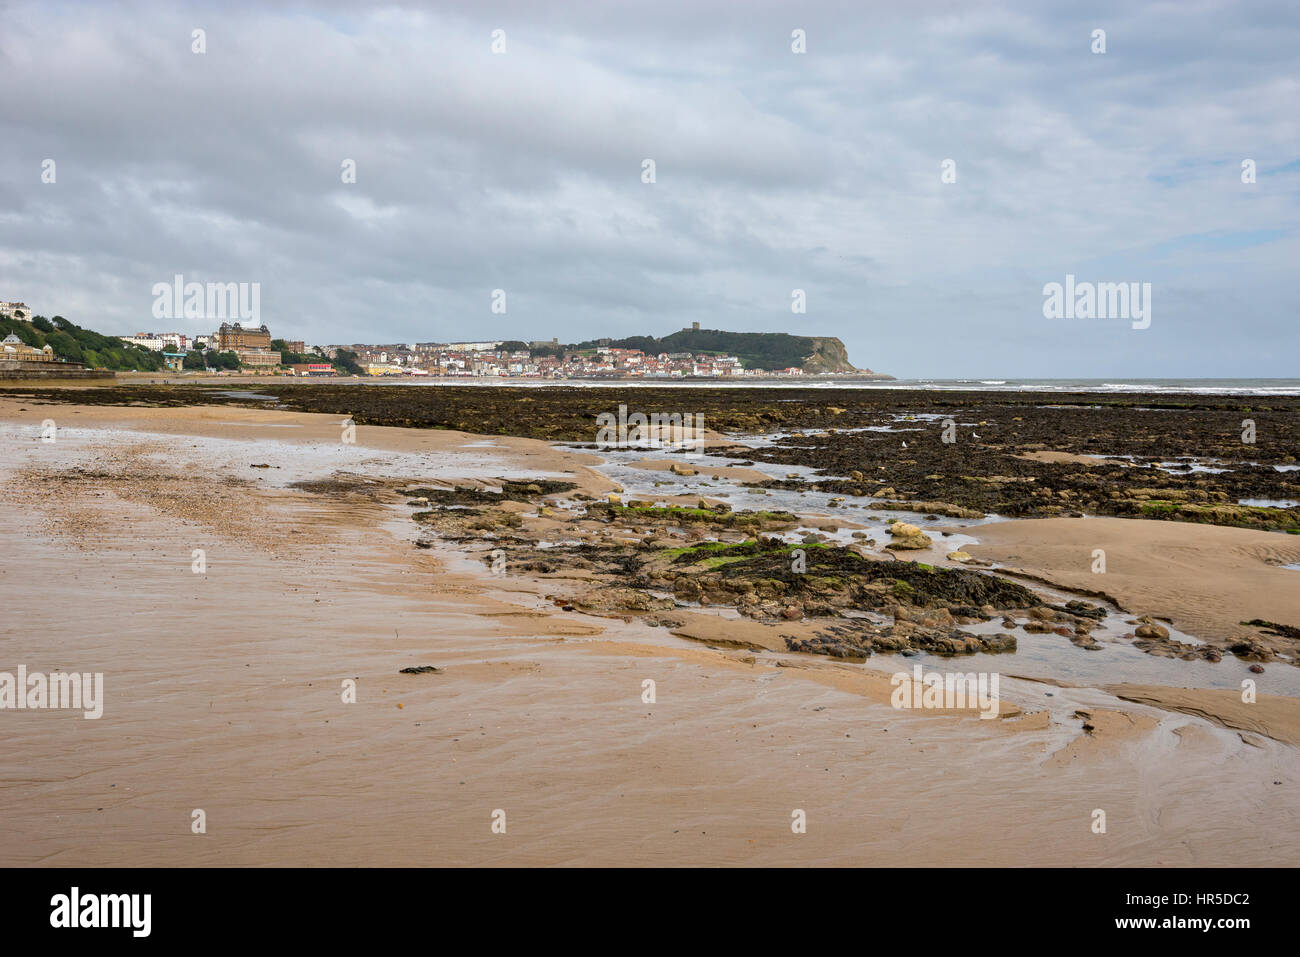 Beach at Scarborough on the coast of North Yorkshire, England. A well known historic seaside town. Stock Photo